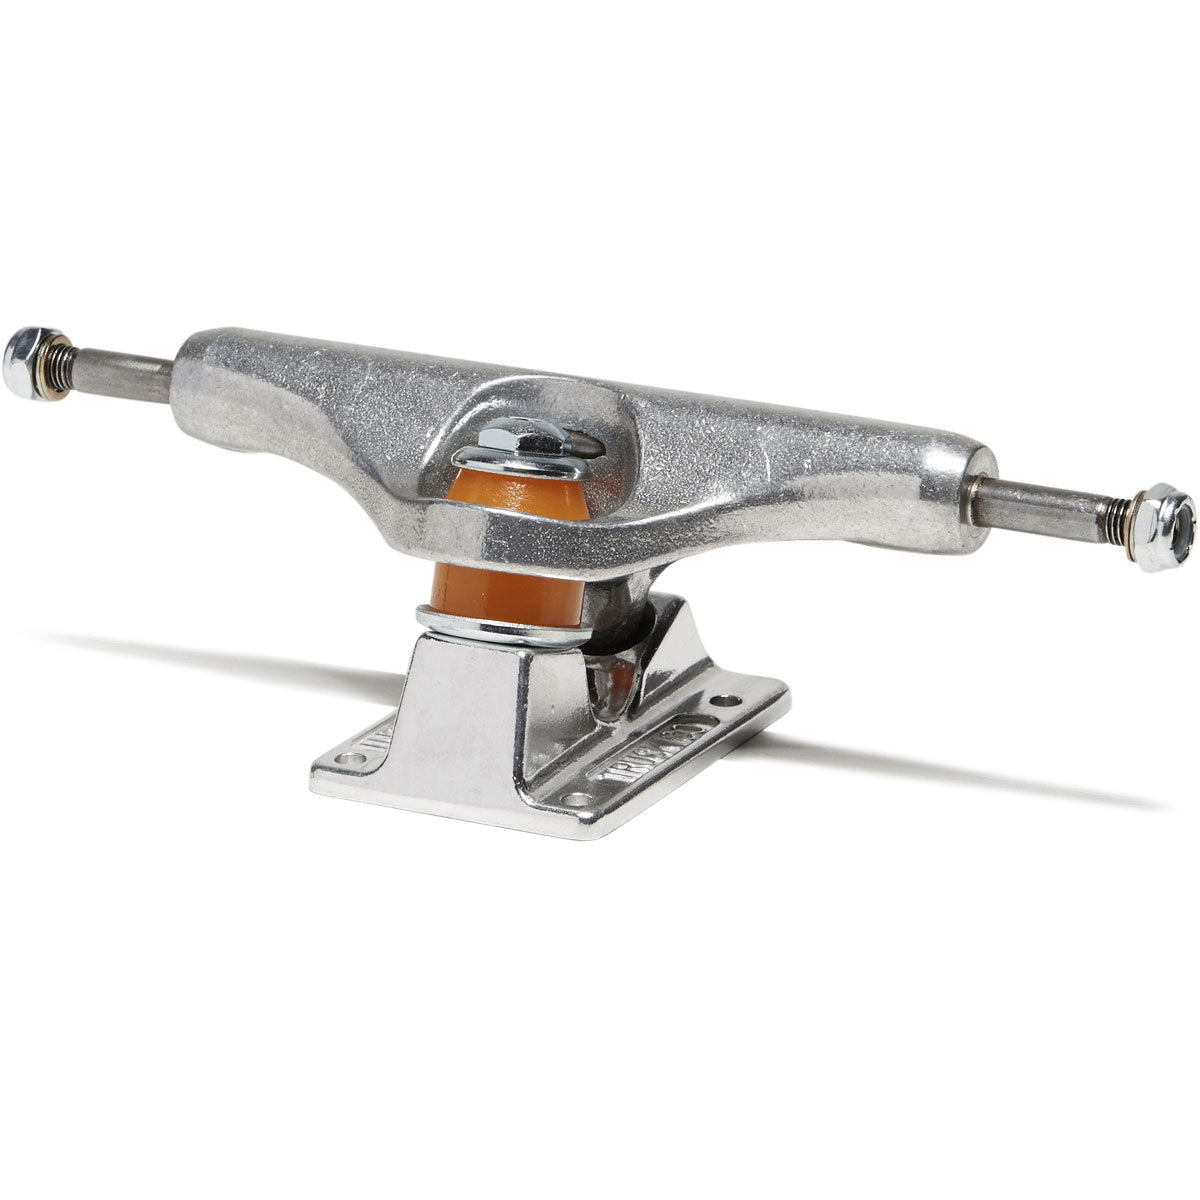 Independent Forged Hollow Mid Skateboard Trucks - 149mm image 2